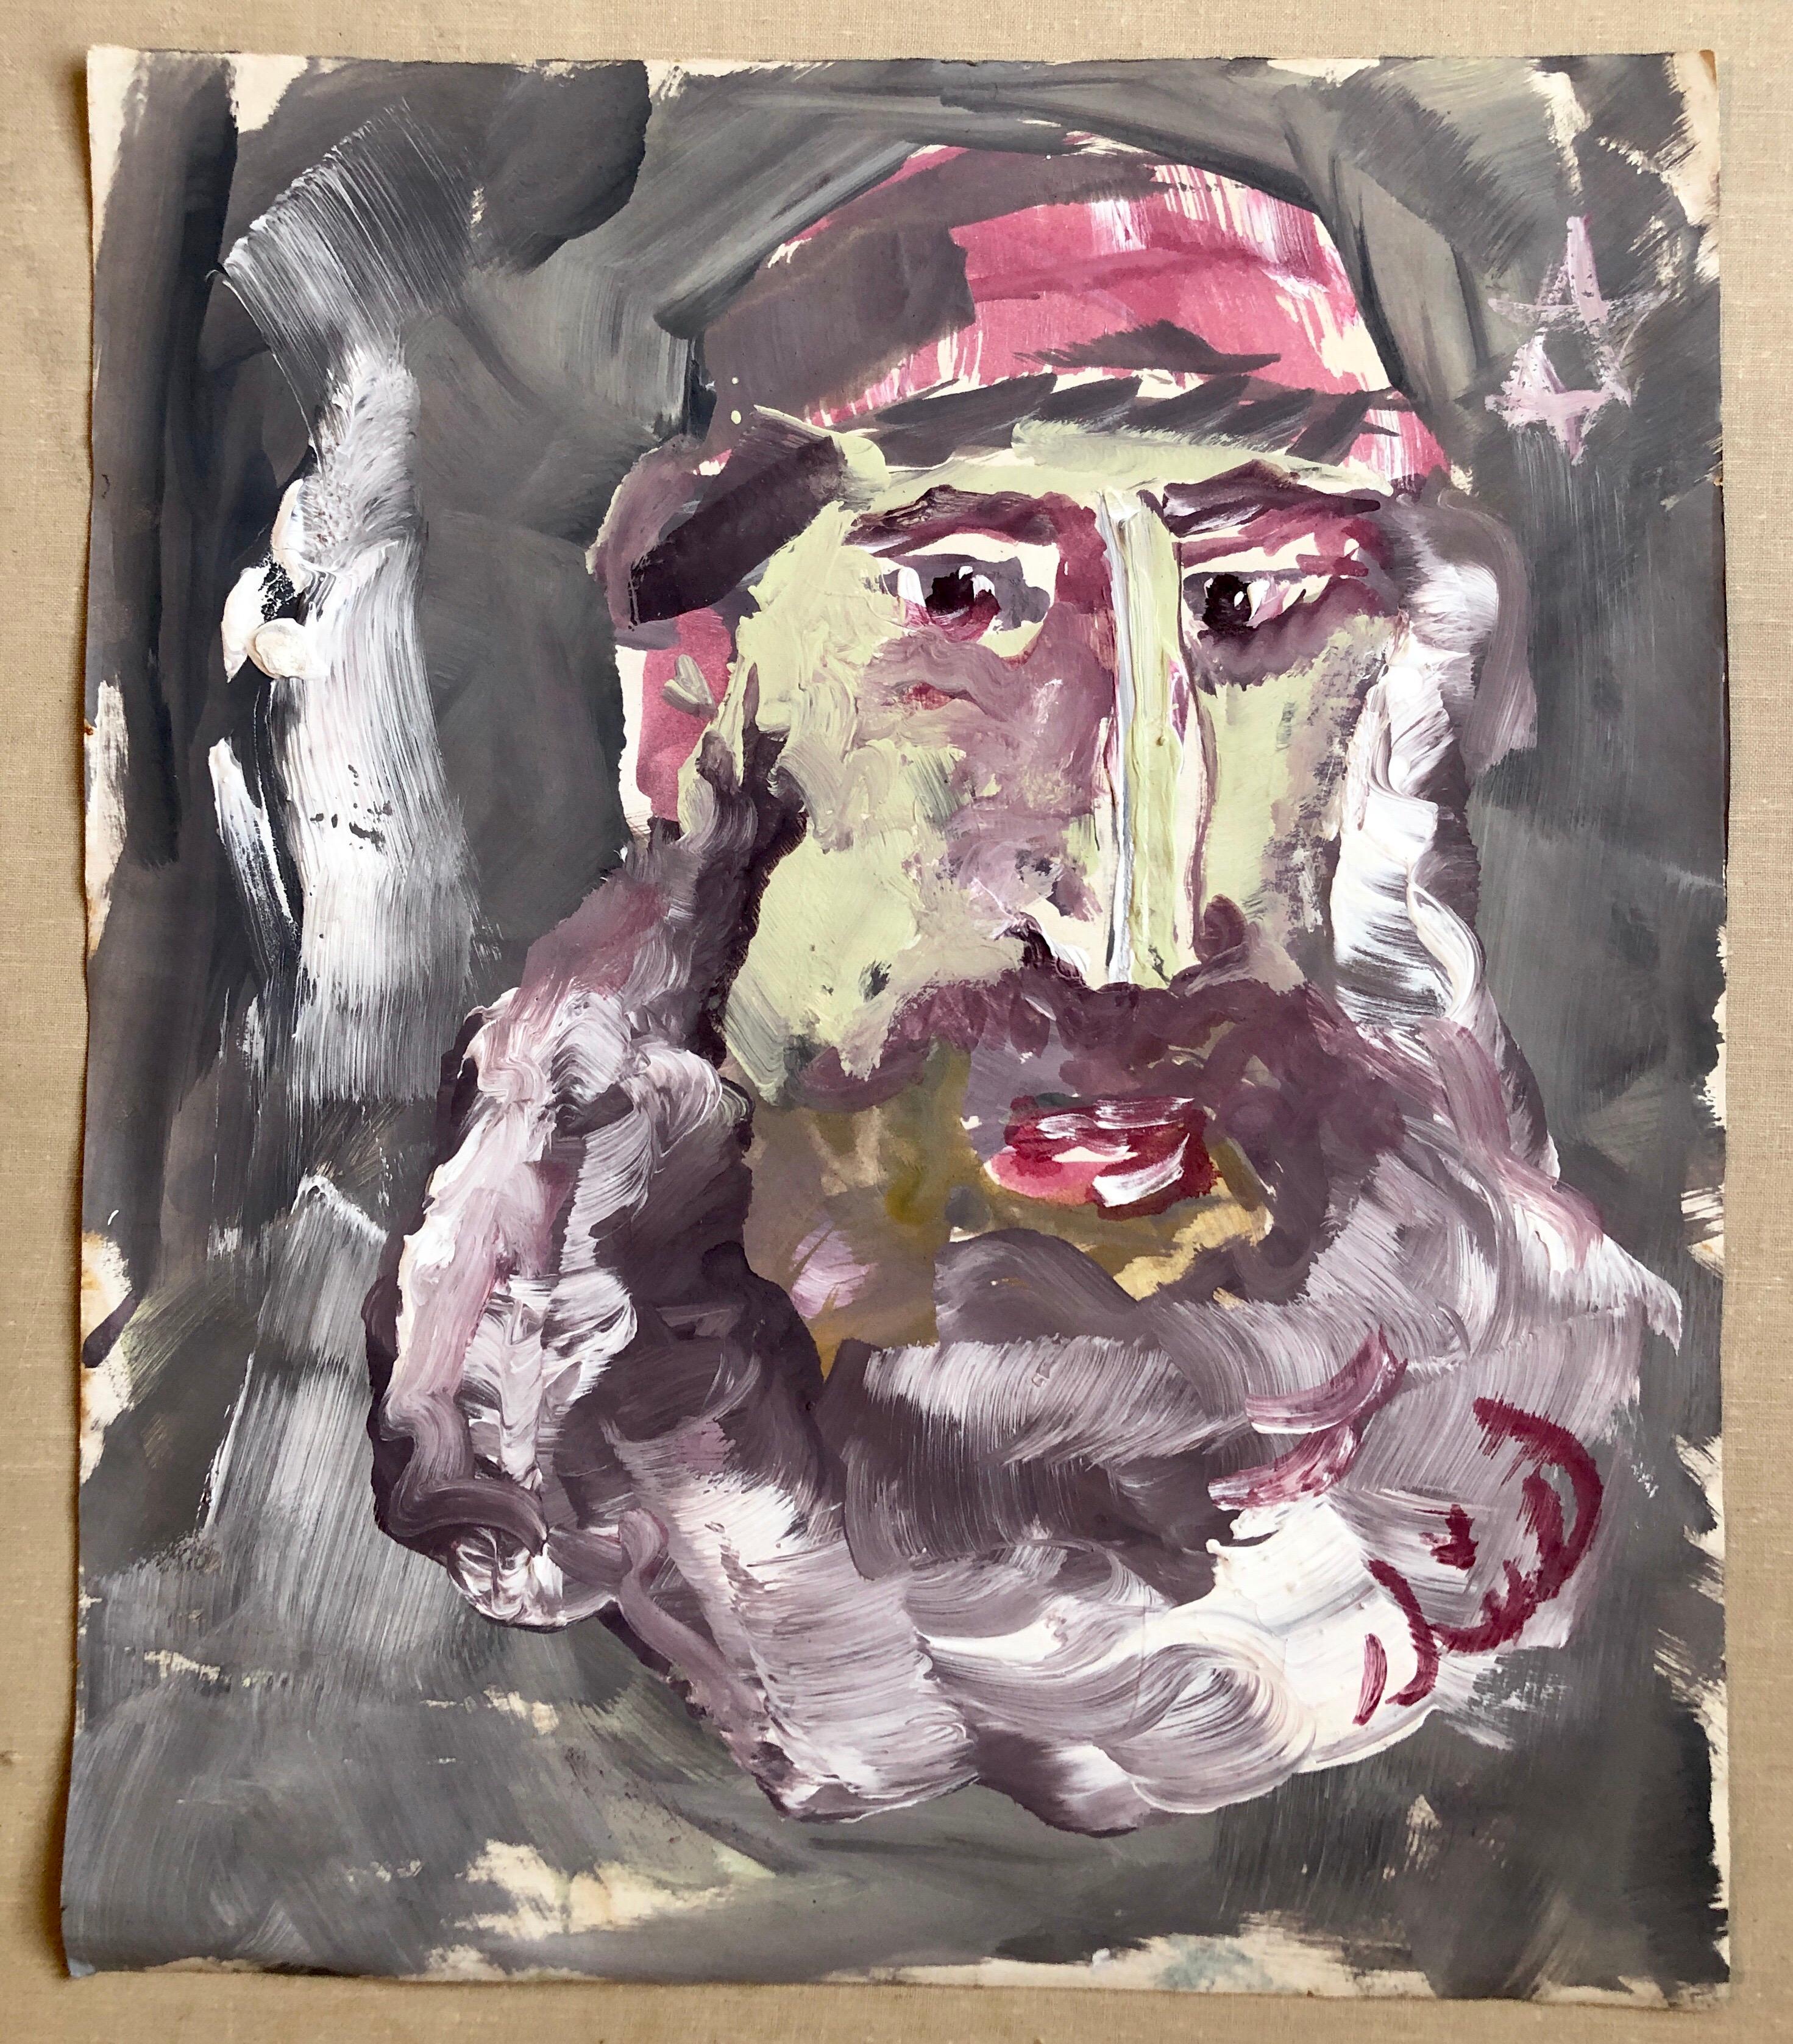 This is a signed portrait painting done in an outsider, folk art, expressionist style. it is signed in Hebrew, also marked with a Jewish star. this is from a collection of works by the same hand. they are all signed. Some have markings to the back